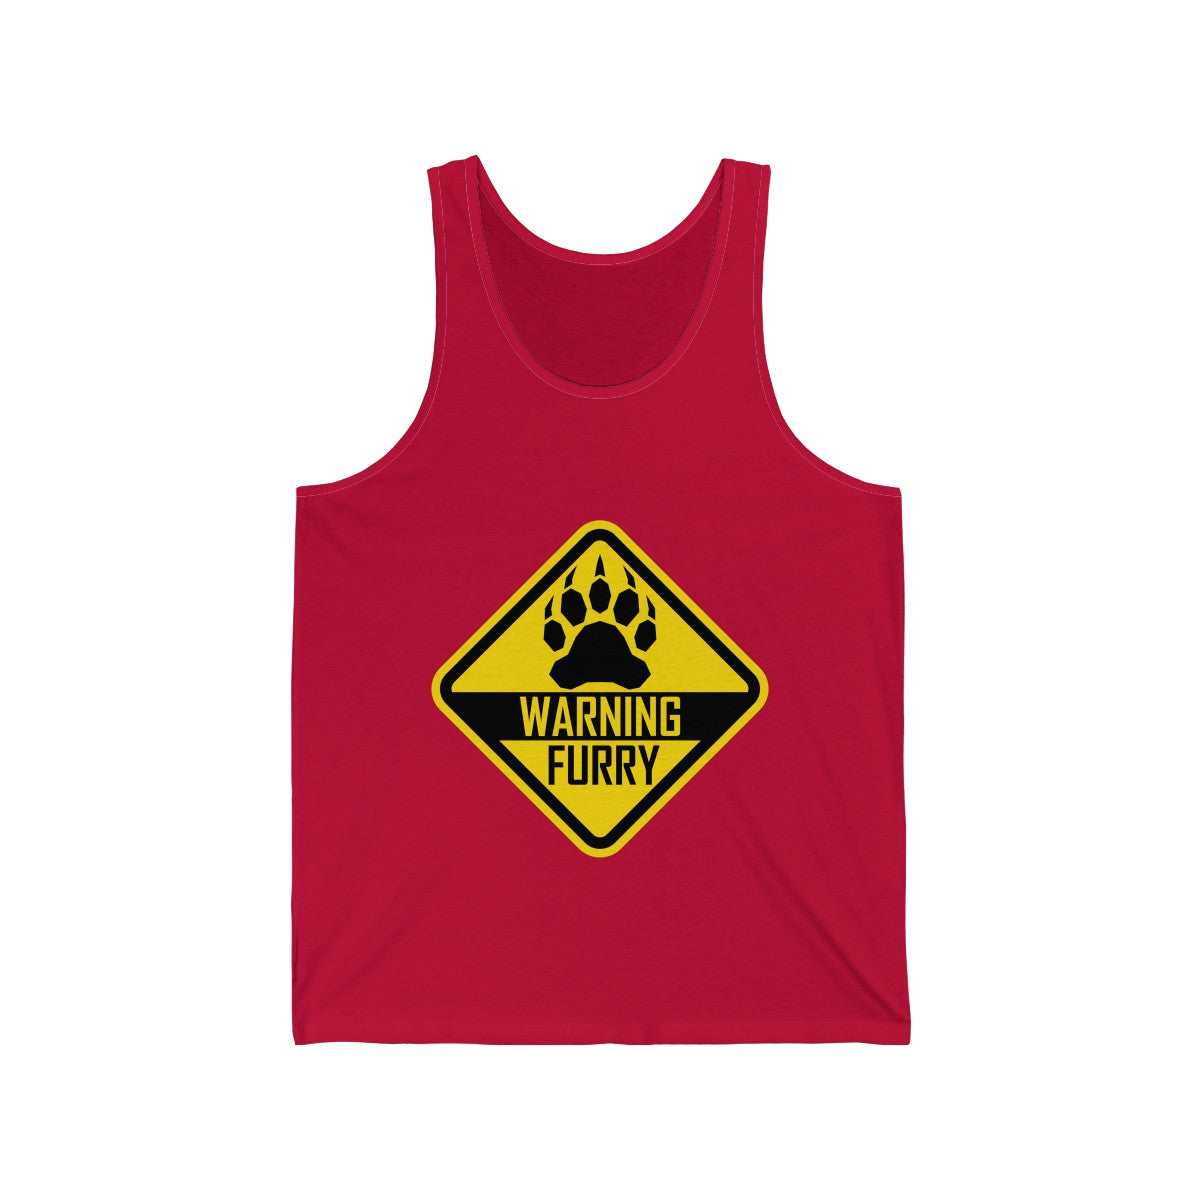 Warning Canine - Tank Top Tank Top Wexon Red XS 